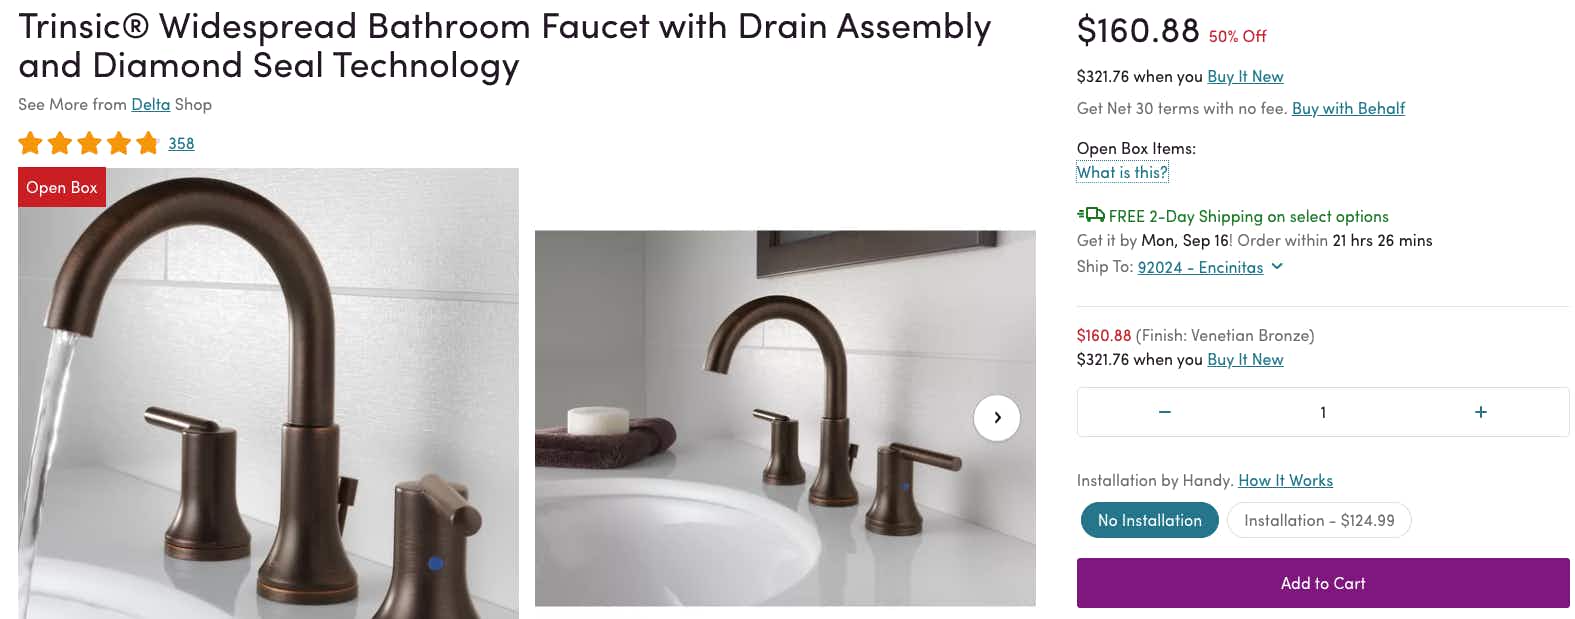 14 Hacks and Tips for WINNING All the Wayfair Deals - The Krazy